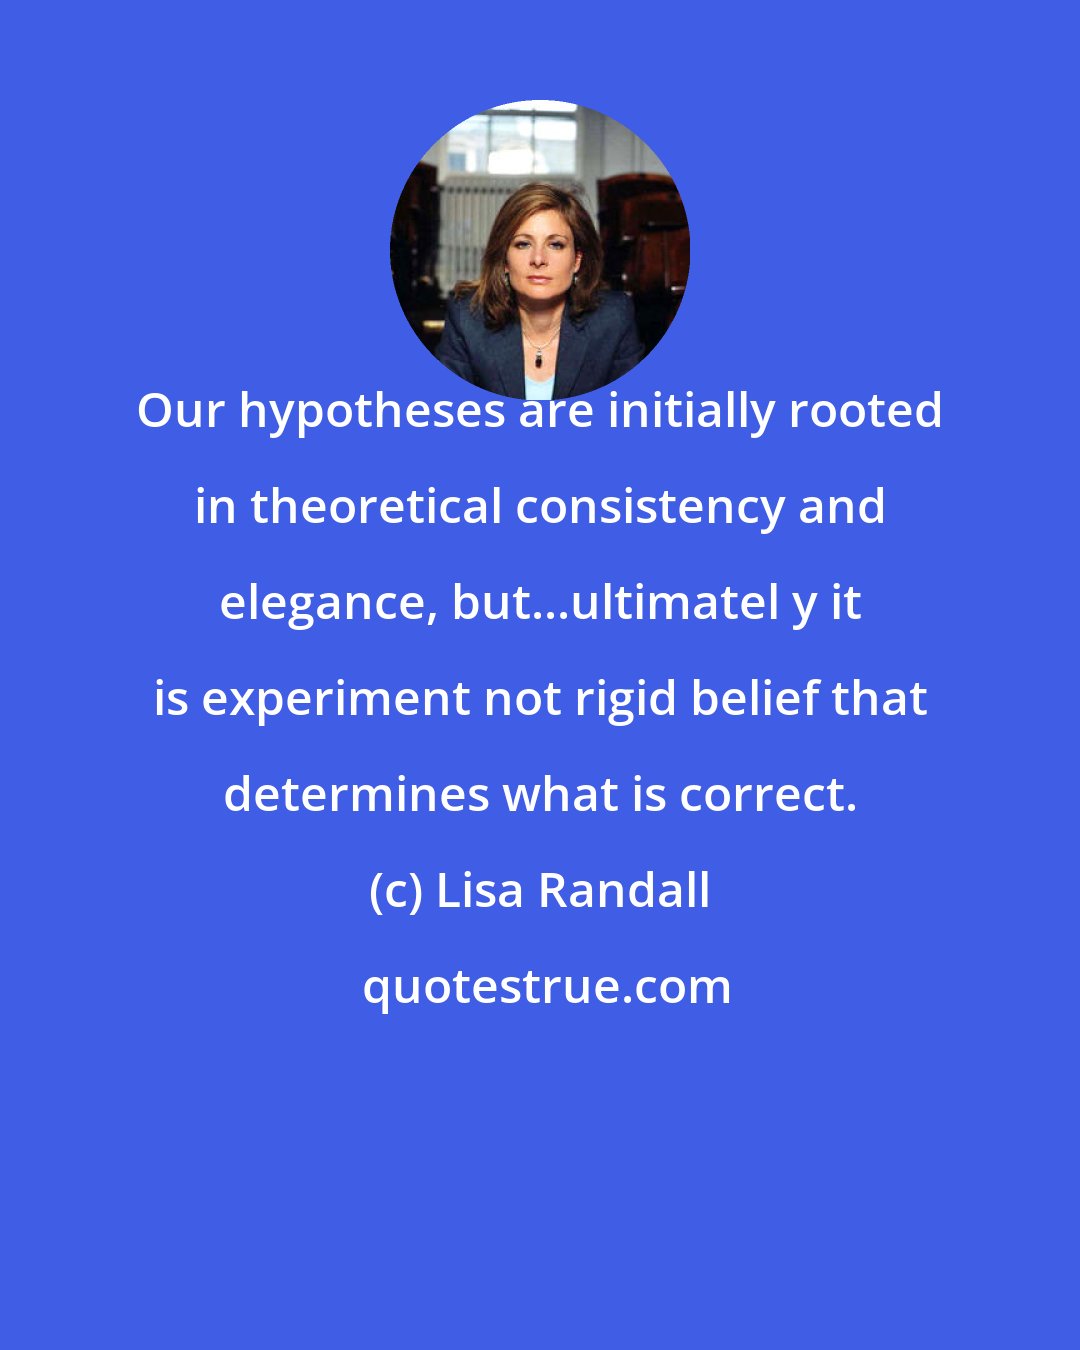 Lisa Randall: Our hypotheses are initially rooted in theoretical consistency and elegance, but...ultimatel y it is experiment not rigid belief that determines what is correct.